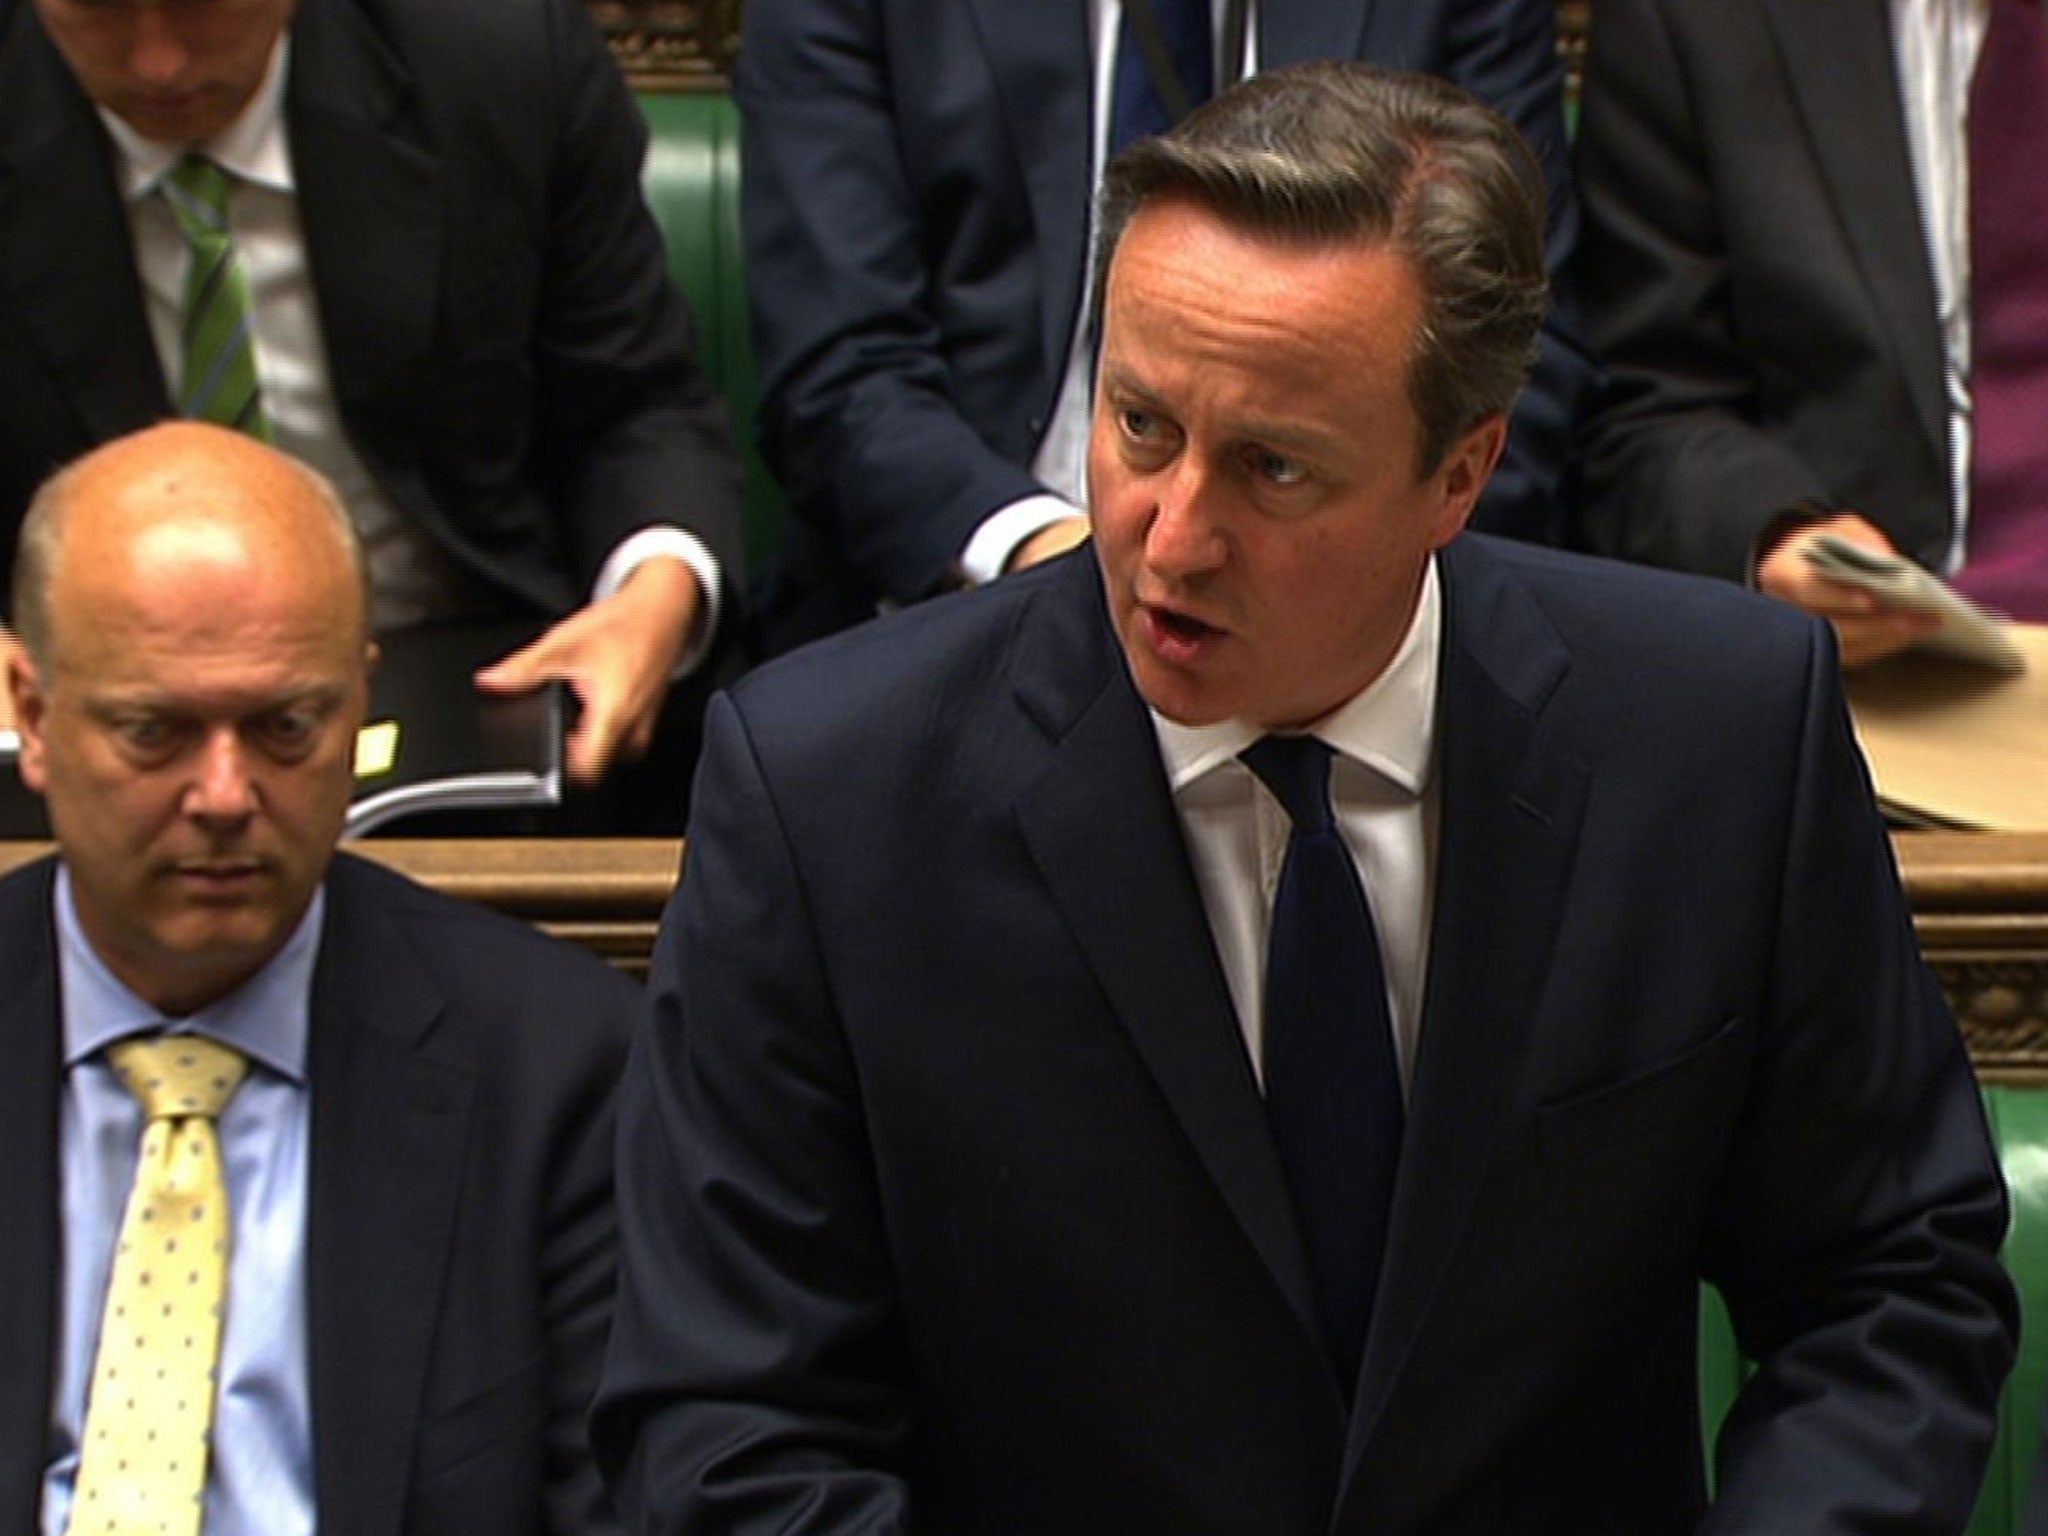 David Cameron gives a statement over the situation in Tunisia to the House of Commons in London